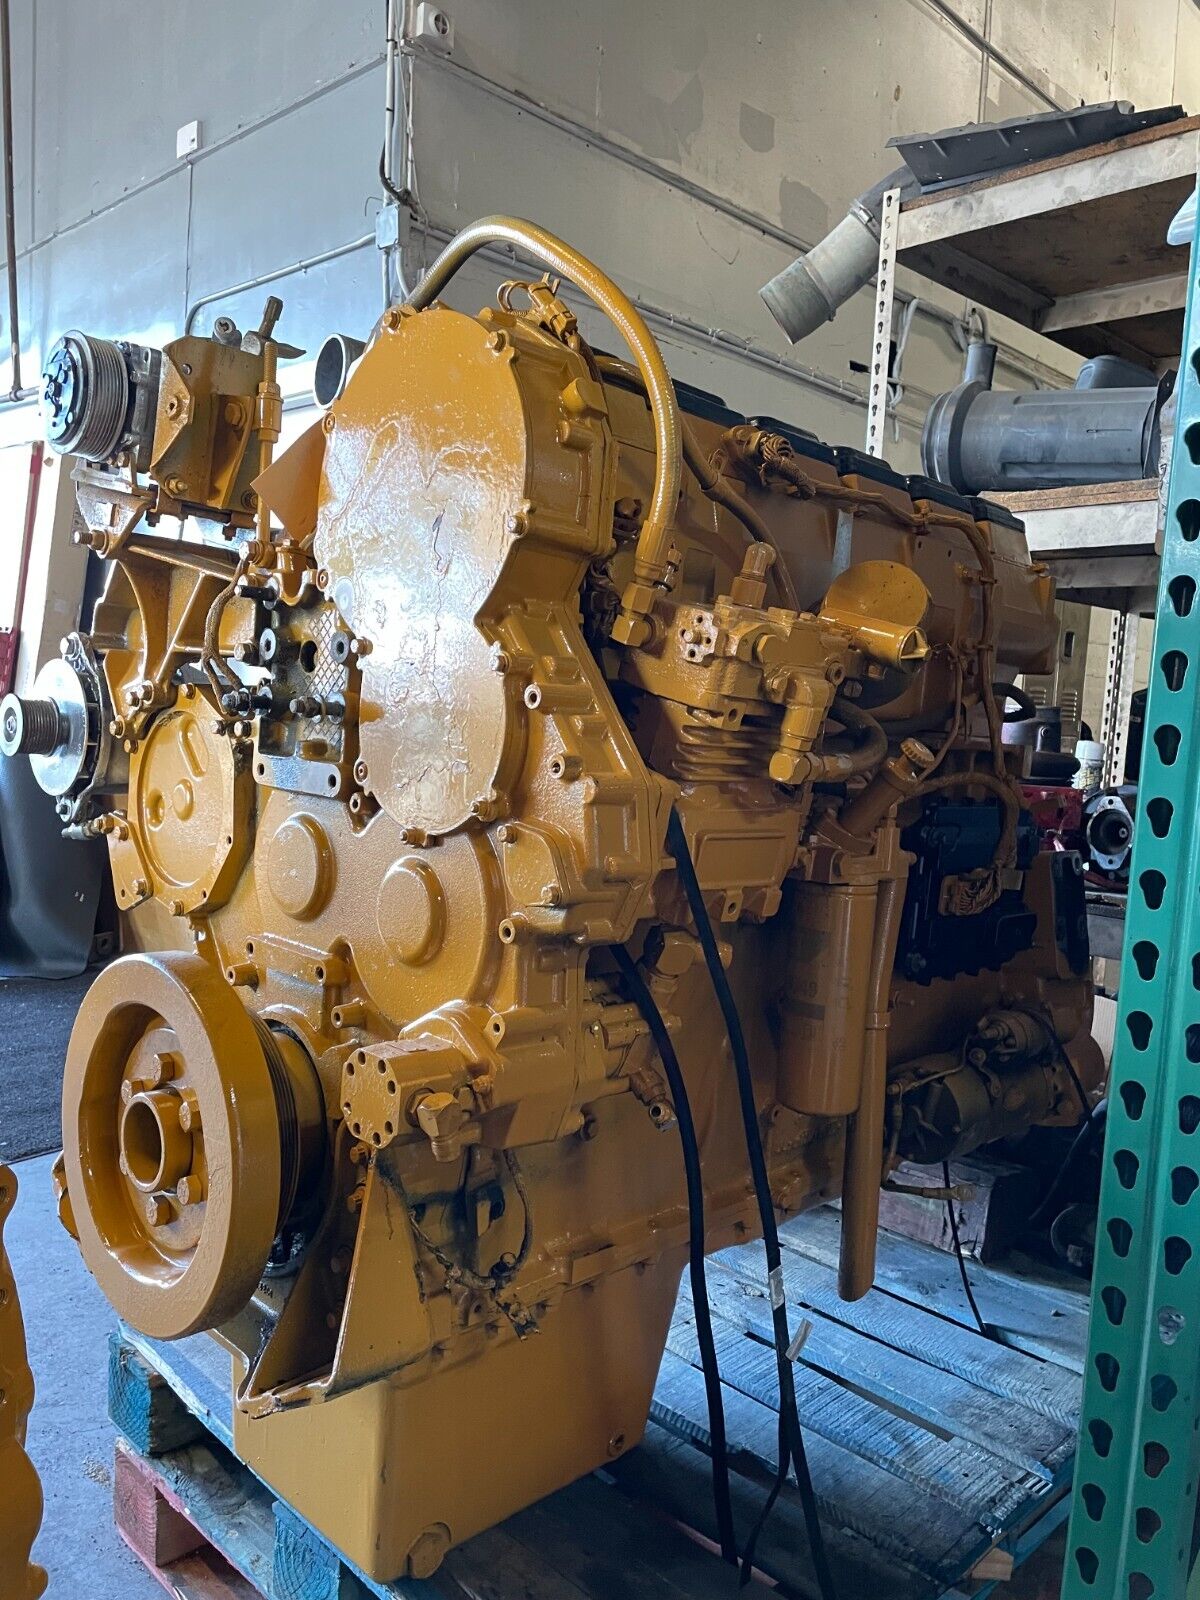 1998 Caterpillar 3406E - 2WS - 550HP  - Diesel Engine For Sale - Fully Tested